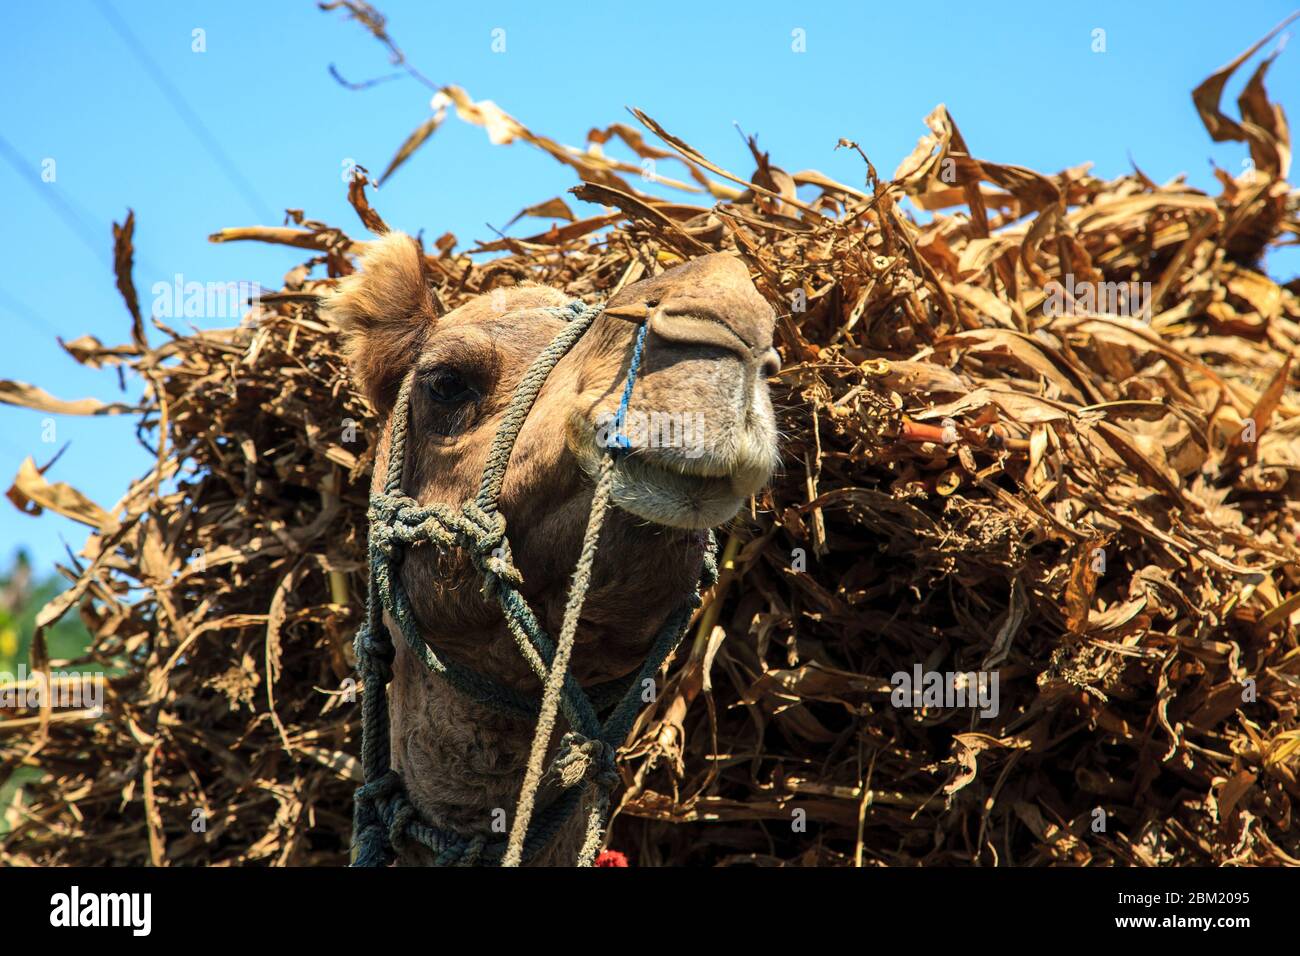 Close up of a camel carrying a bale of straw in rural Rajasthan, India Stock Photo